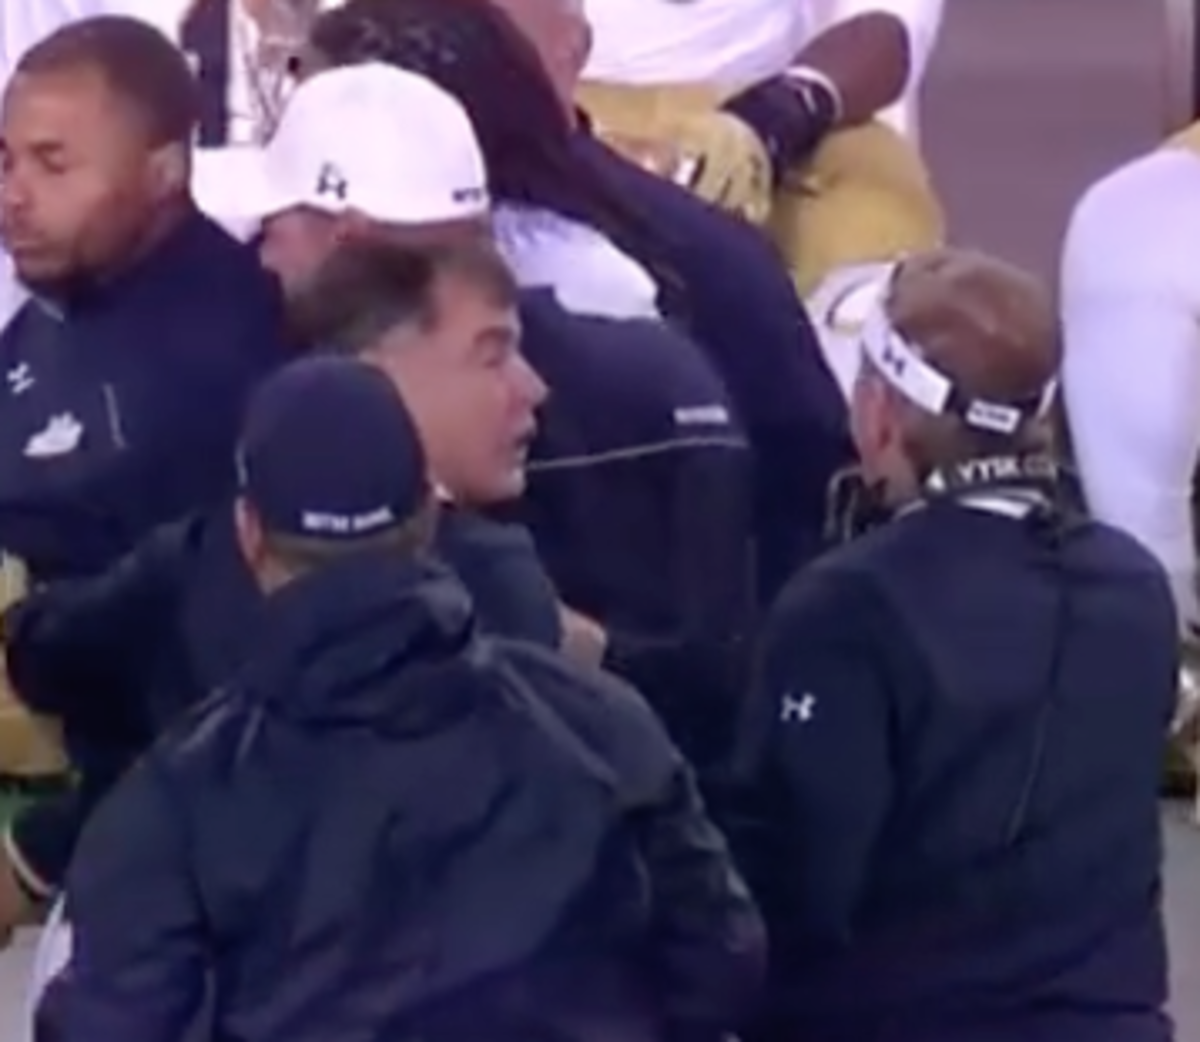 Brian Kelly gets restrained after fighting Irish strength coach.